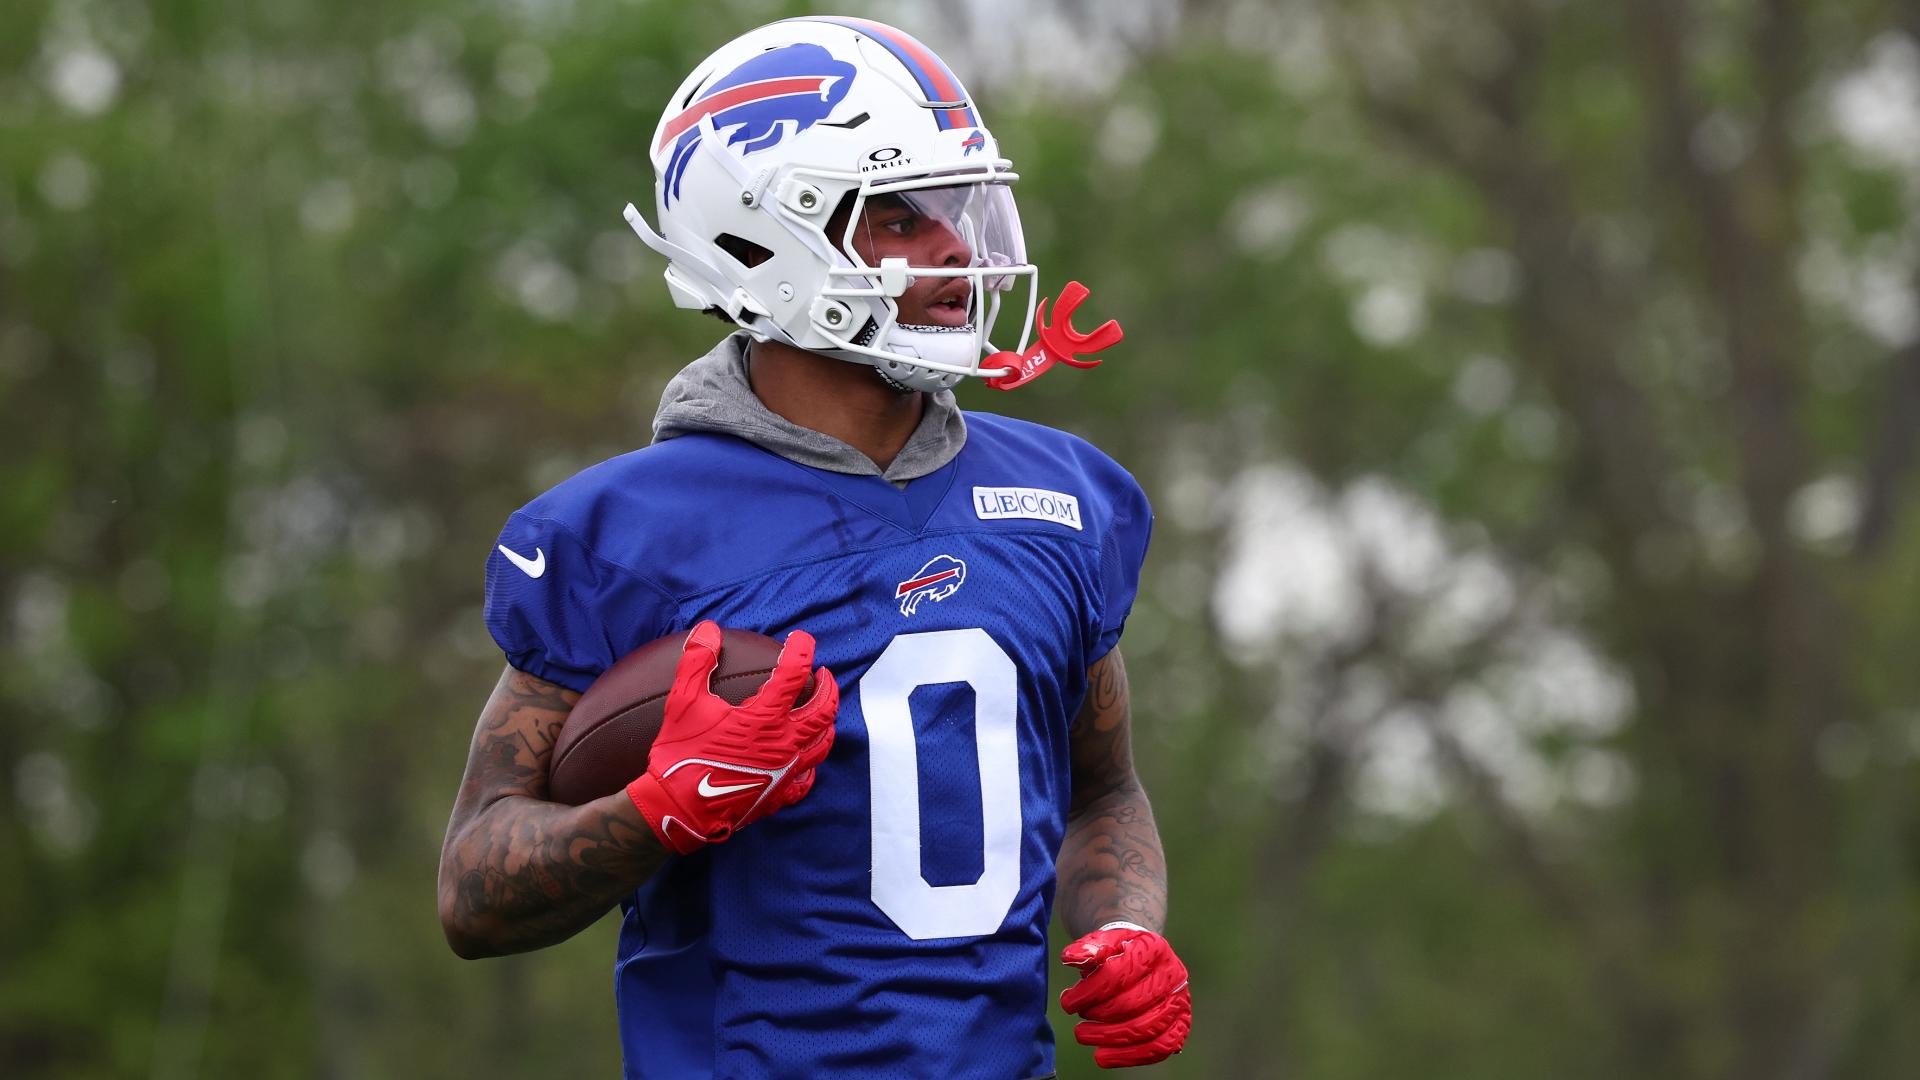 2 On Your Side's Jon Scott, Lindsey Moppert, and Jonathan Acosta discuss what they saw and heard Friday at the Buffalo Bills rookie minicamp.